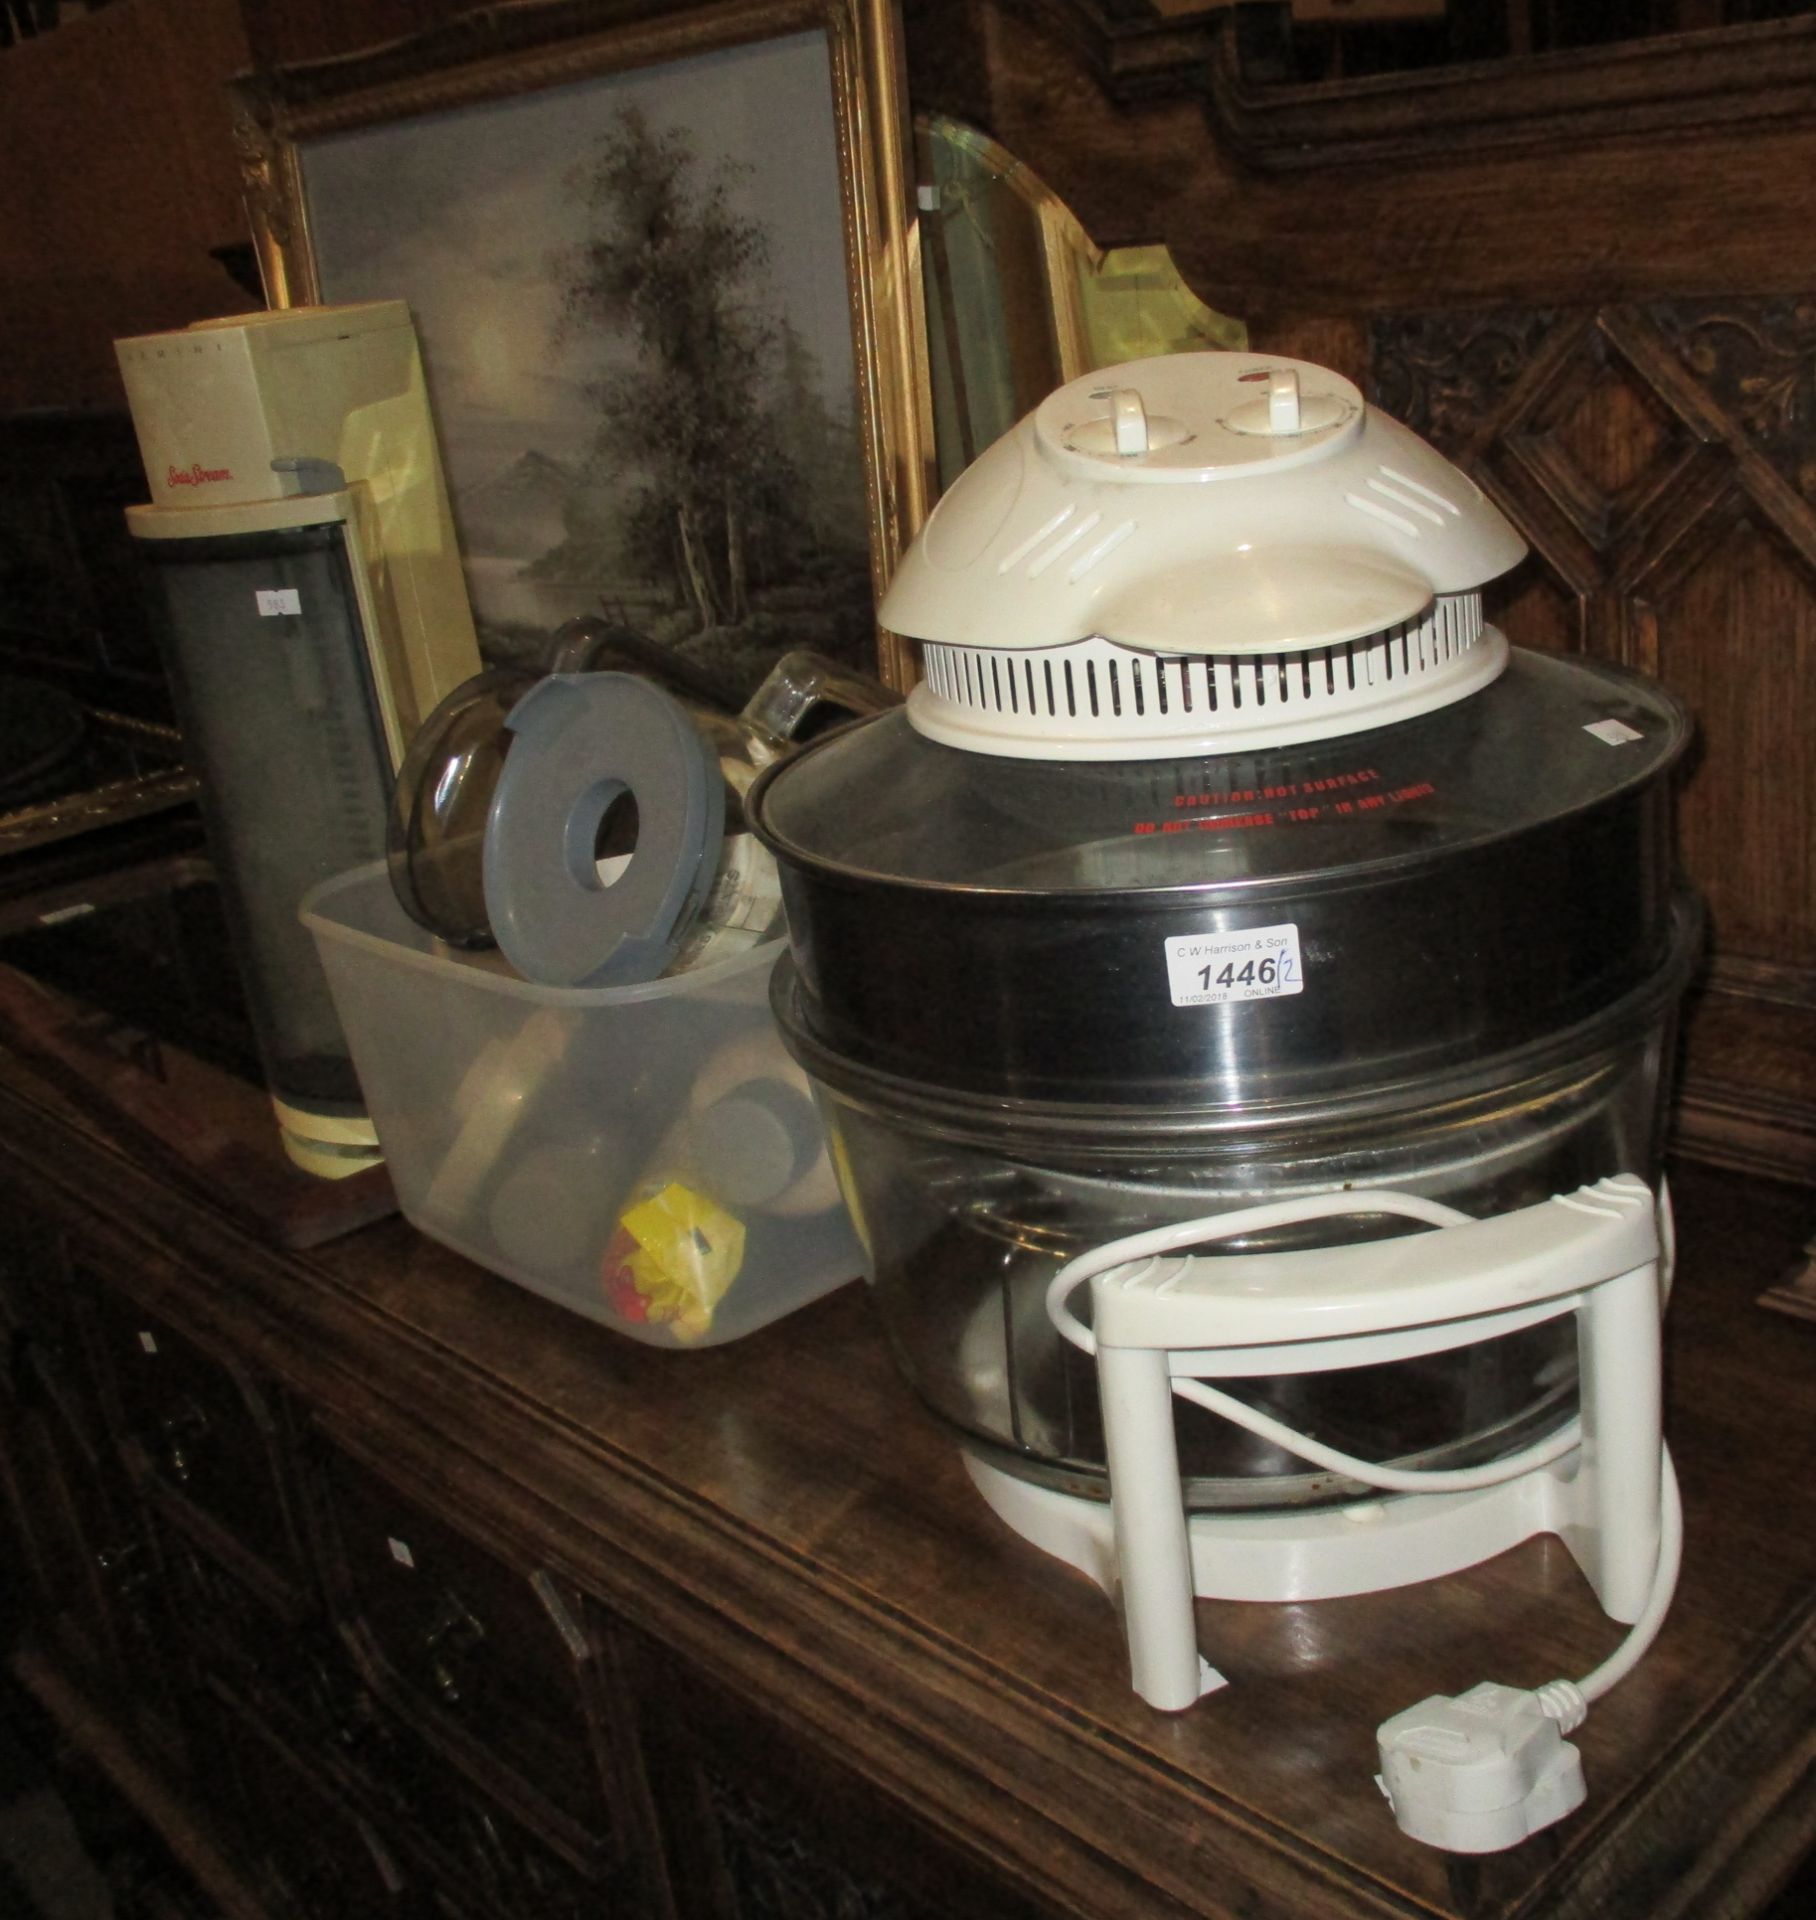 A Cookshop large halogen oven model SSTV 7865-240v and a Gemini soda stream and some attachments